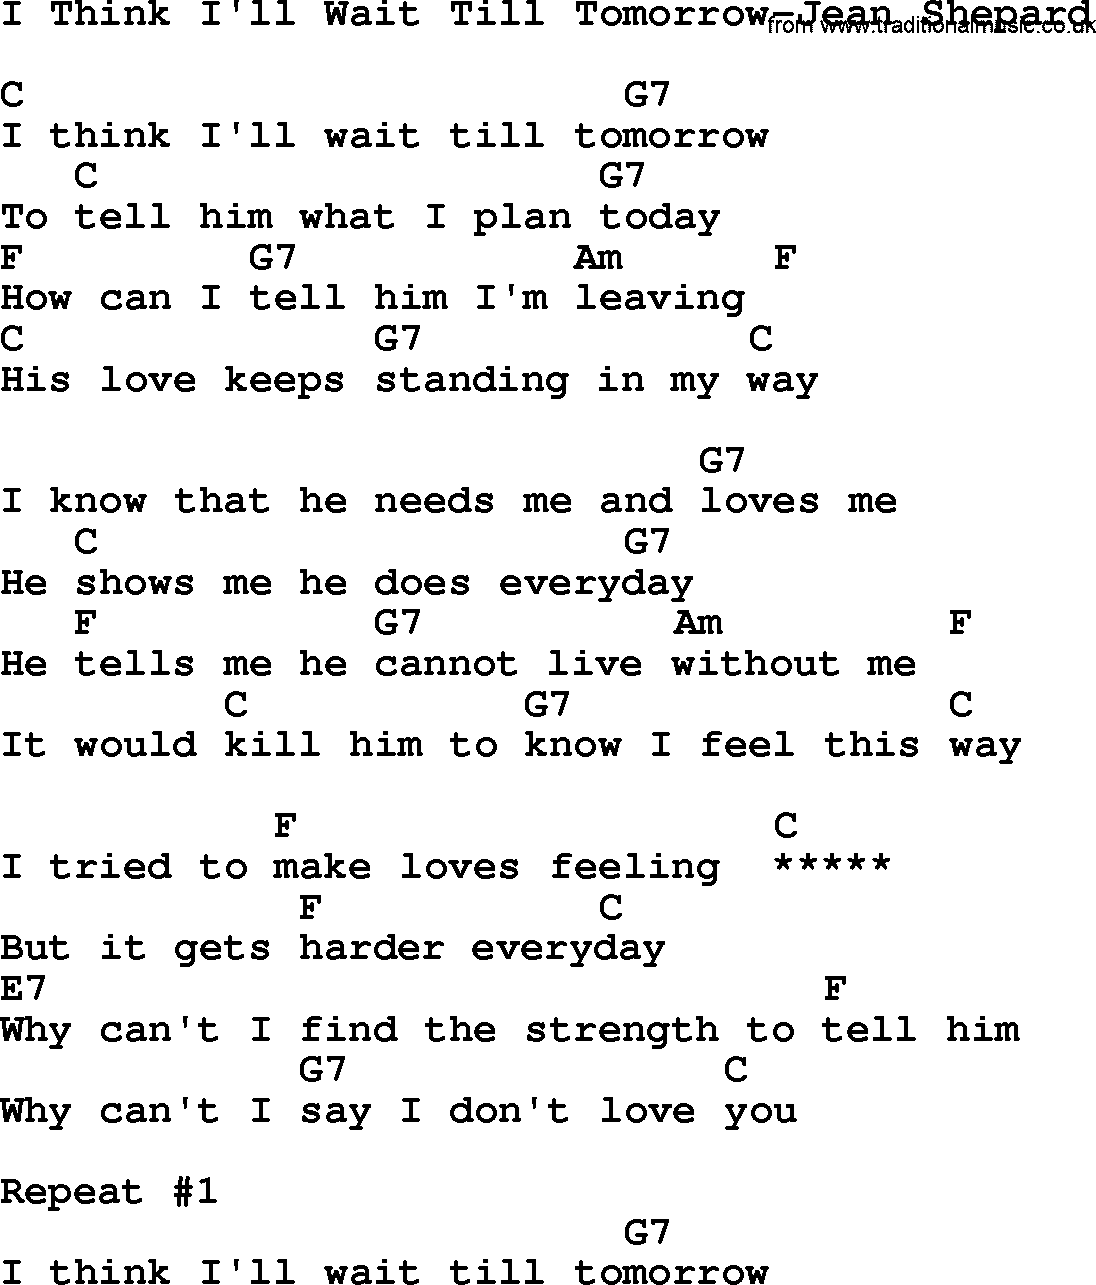 Country music song: I Think I'll Wait Till Tomorrow-Jean Shepard lyrics and chords